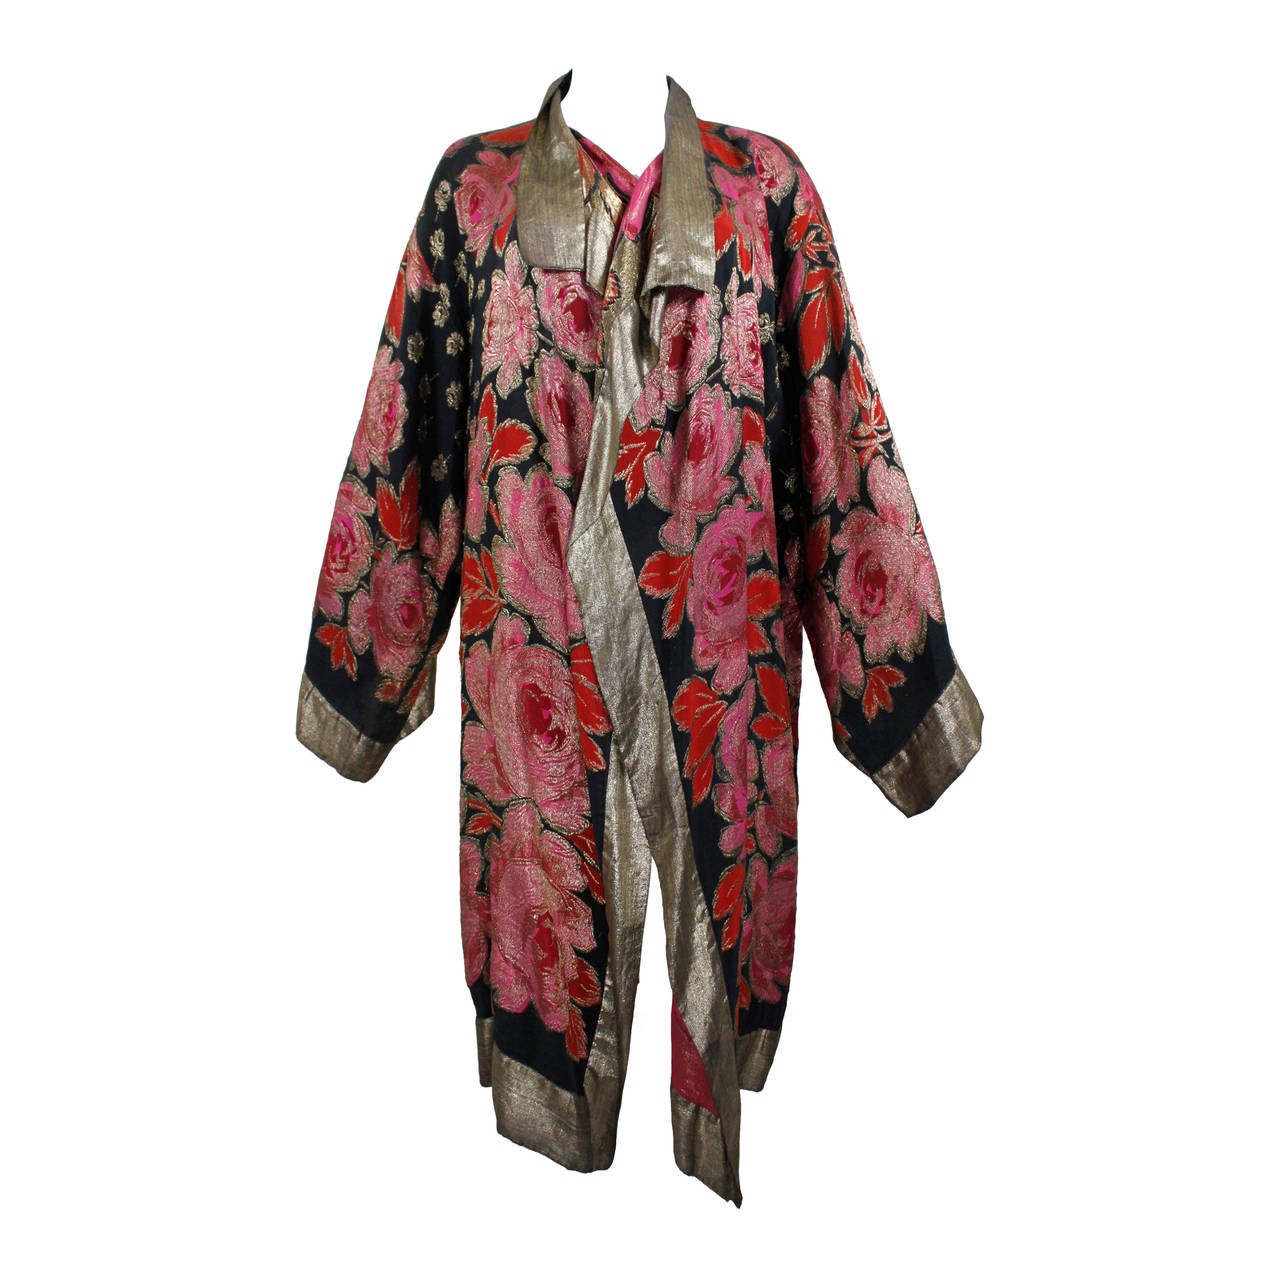 Late 1920s Bright Rose and Gold Lamé Jacket